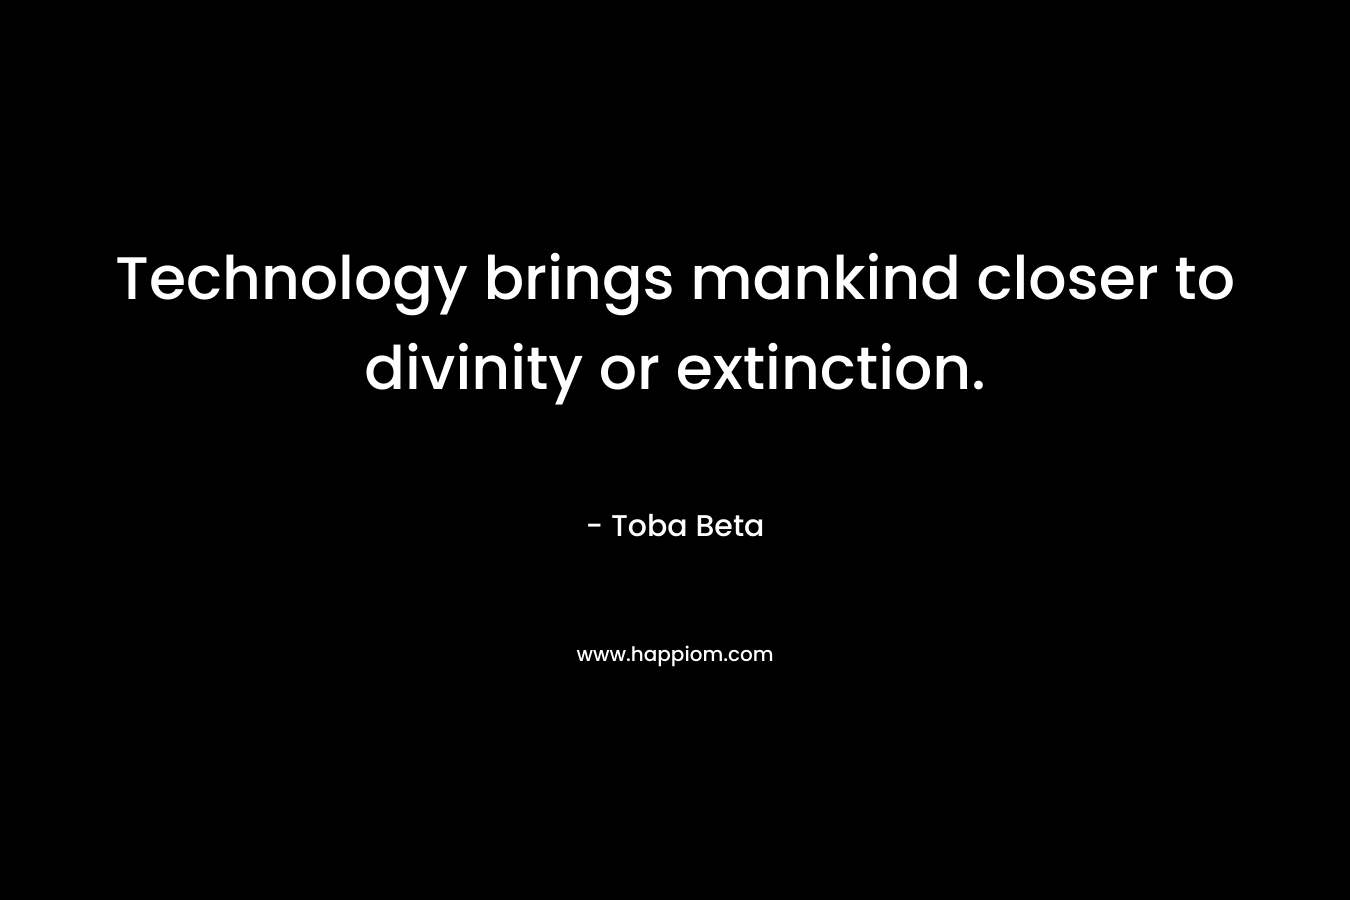 Technology brings mankind closer to divinity or extinction. – Toba Beta